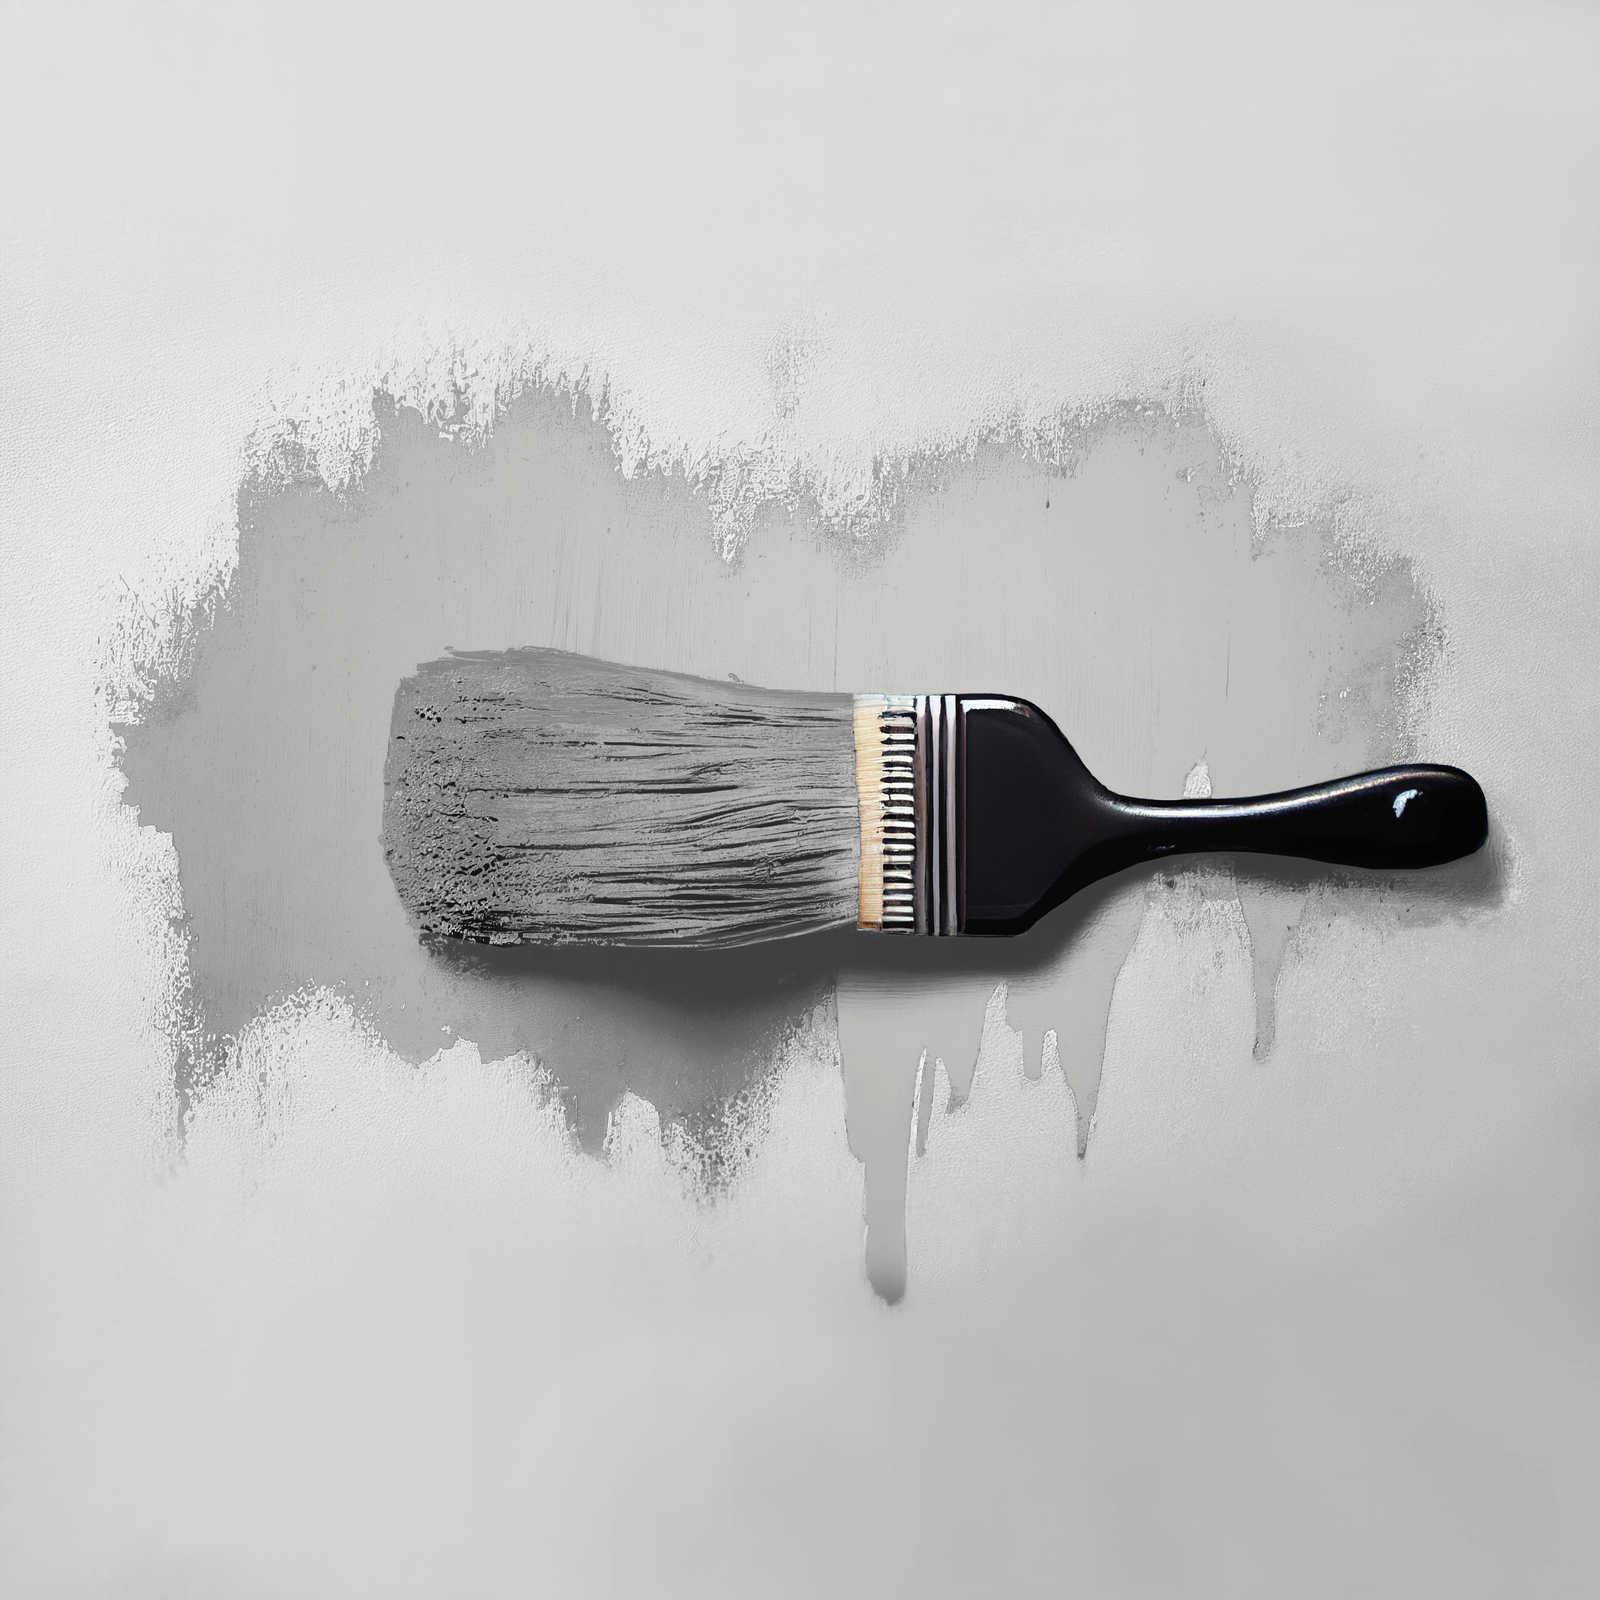             Wall Paint TCK1004 »Shady Spice« in cool grey – 2.5 litre
        